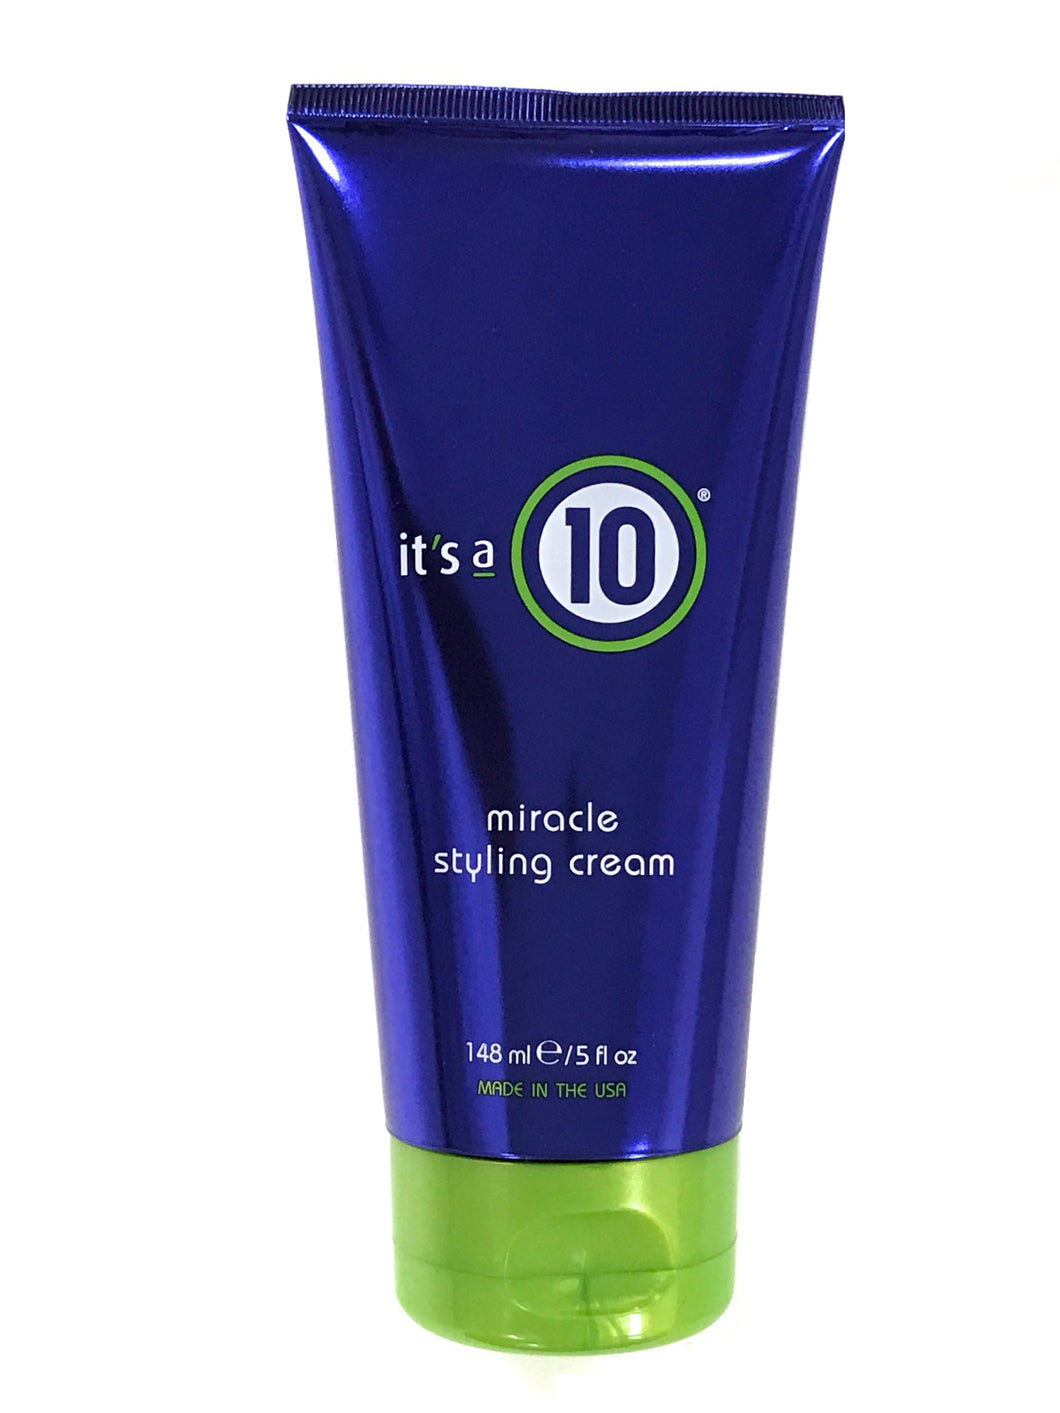 Its a 10 Miracle Styling Cream